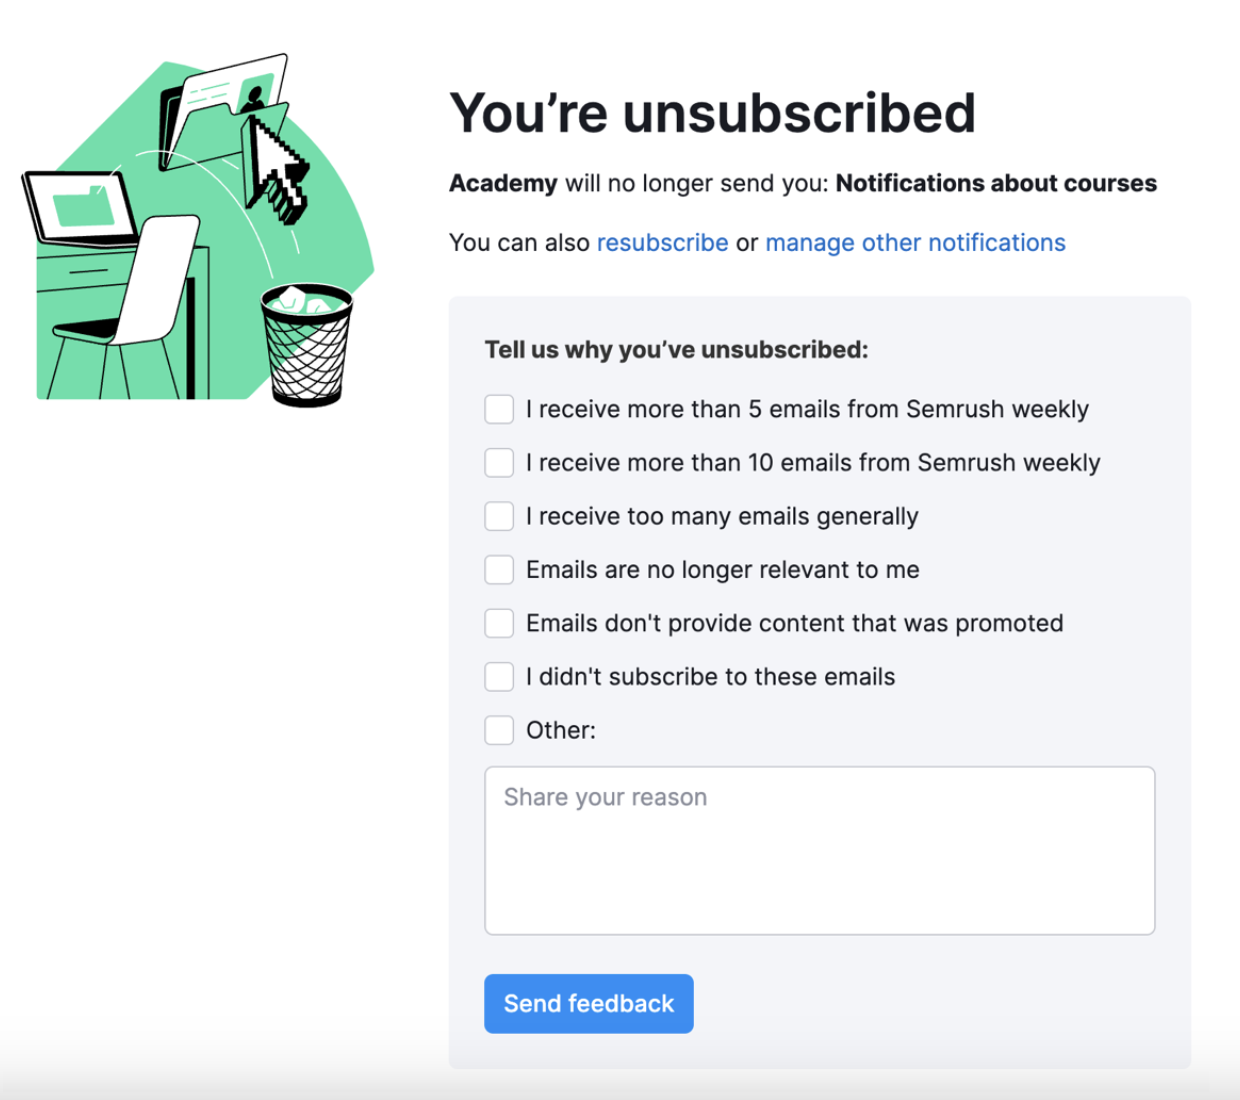 What the feedback form of newsletters looks like. There is a list of reasons to unsubscribe and an option to leave a comment. There is also an option to resubscribe.